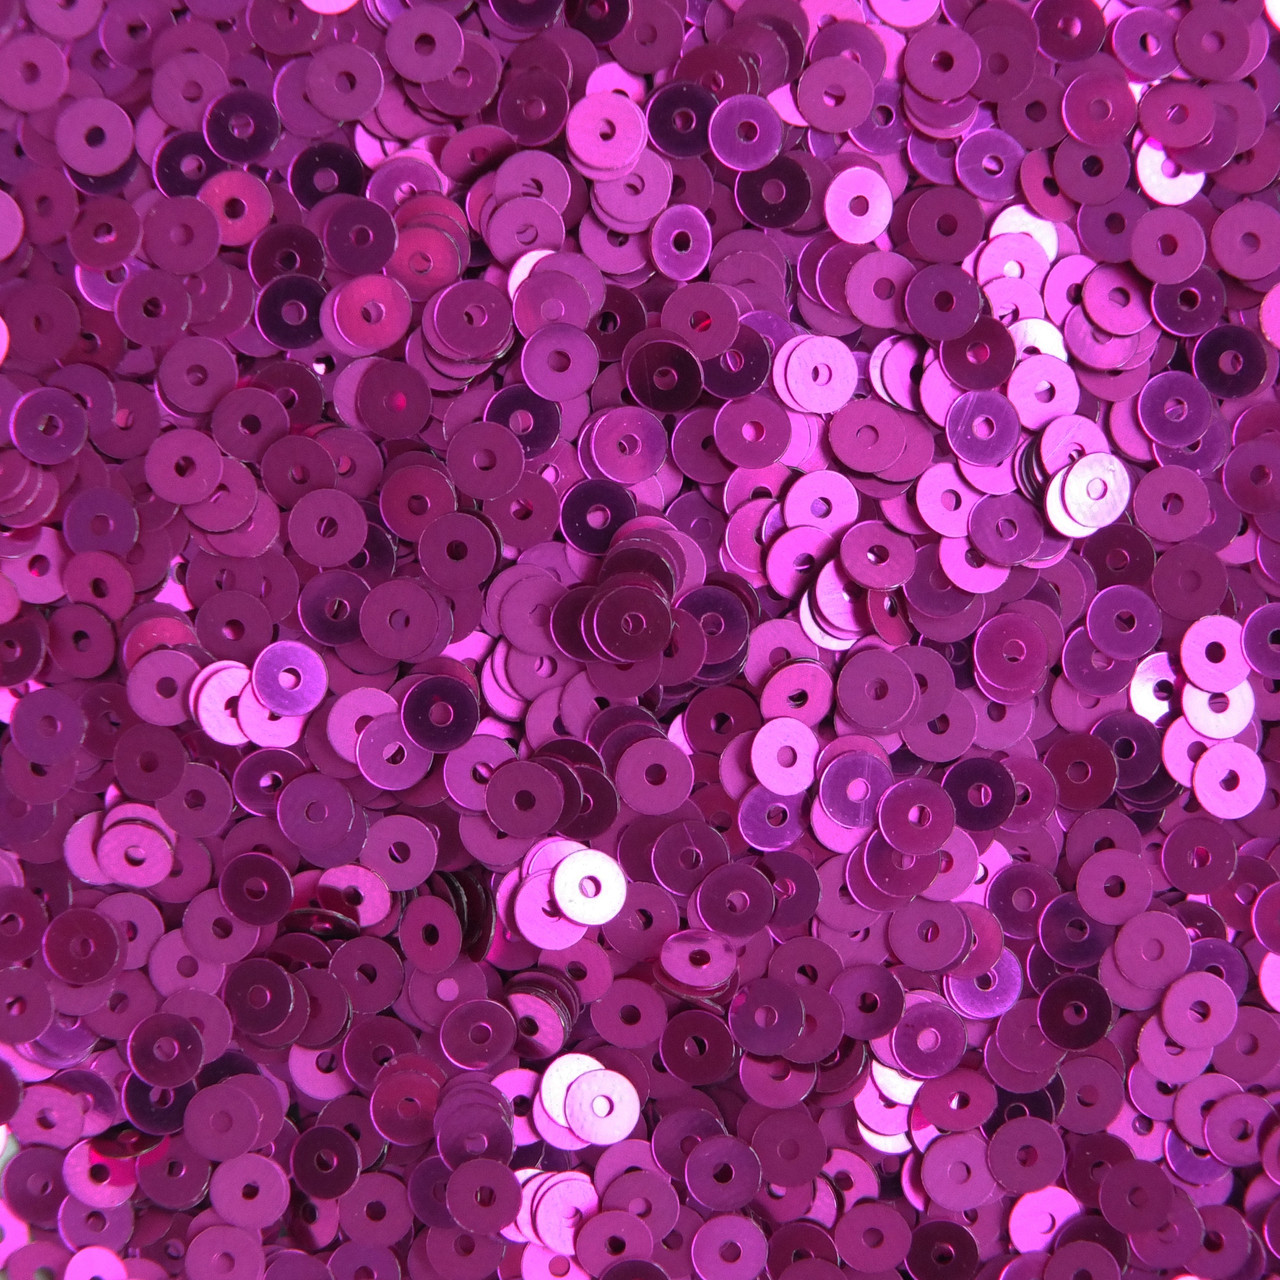 4mm Round Flat Sequins Fuchsia Pink Duo Reversible Matte and Shiny Metallic Reversible. Made in USA